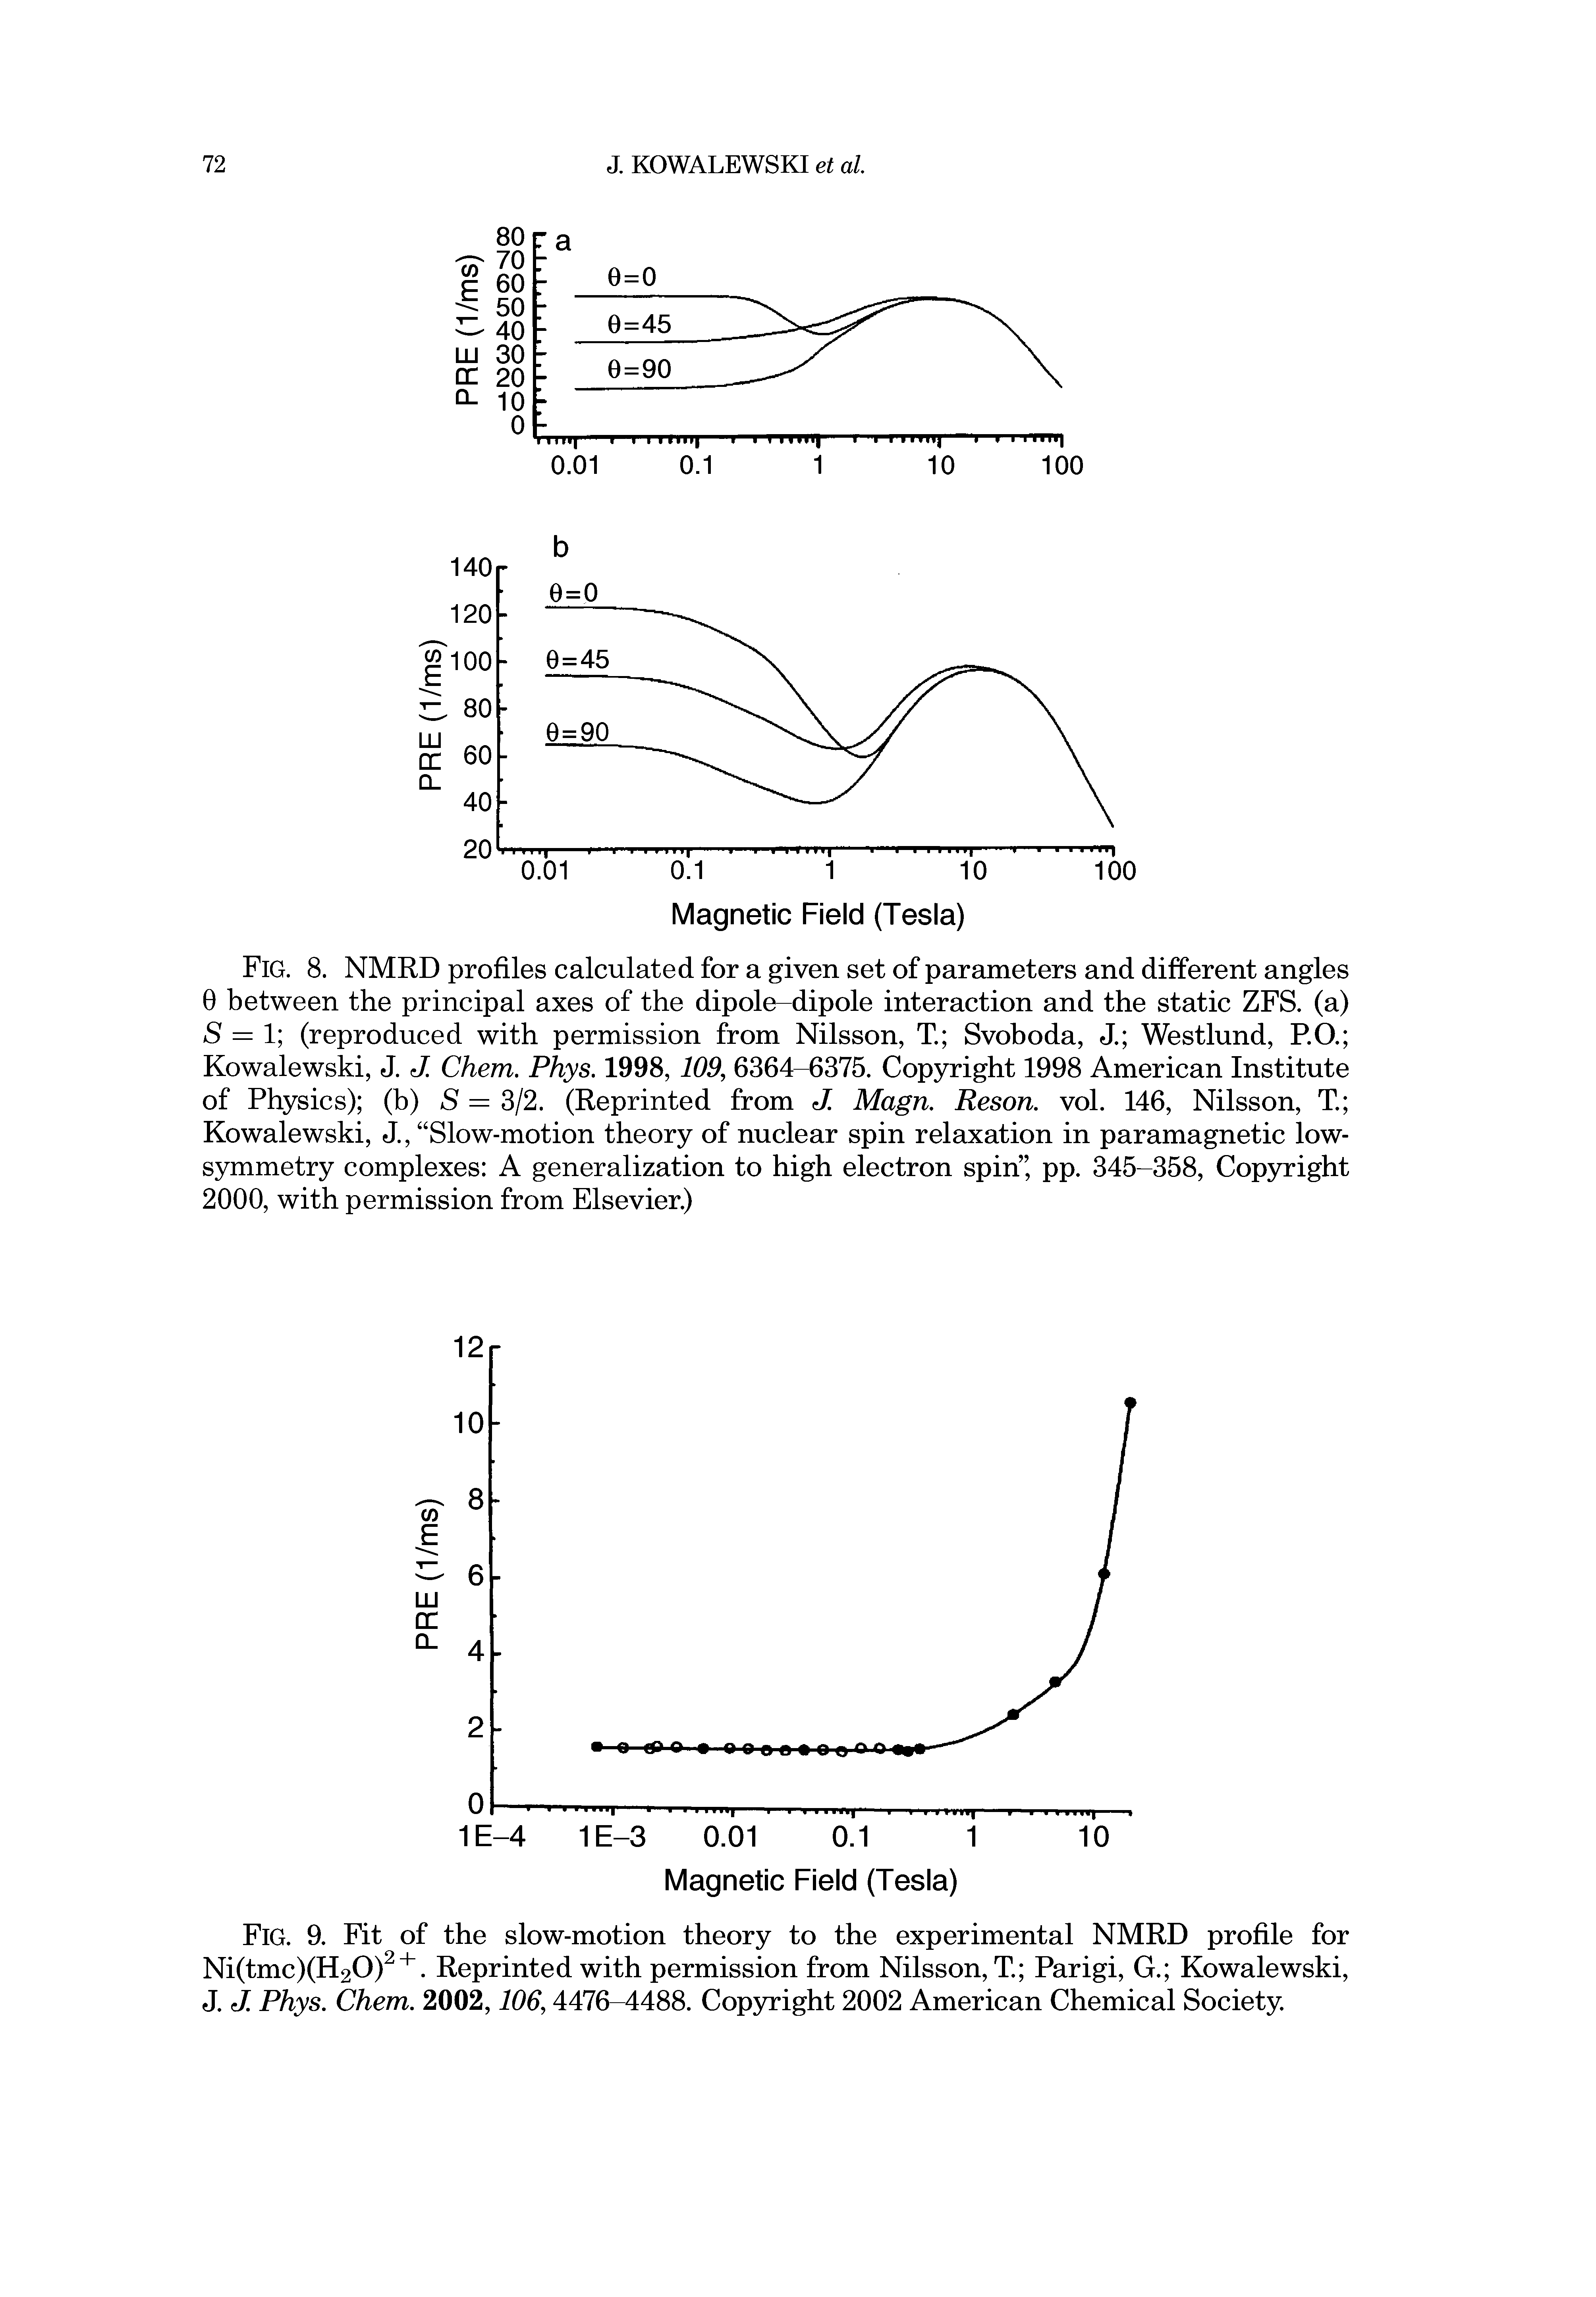 Fig. 9. Fit of the slow-motion theory to the experimental NMRD profile for Ni(tmc)(H20). Reprinted with permission from Nilsson, T Parigi, G. Kowalewski, J. J. Phys. Chem. 2002,106,4476-4488. Copyright 2002 American Chemical Society.